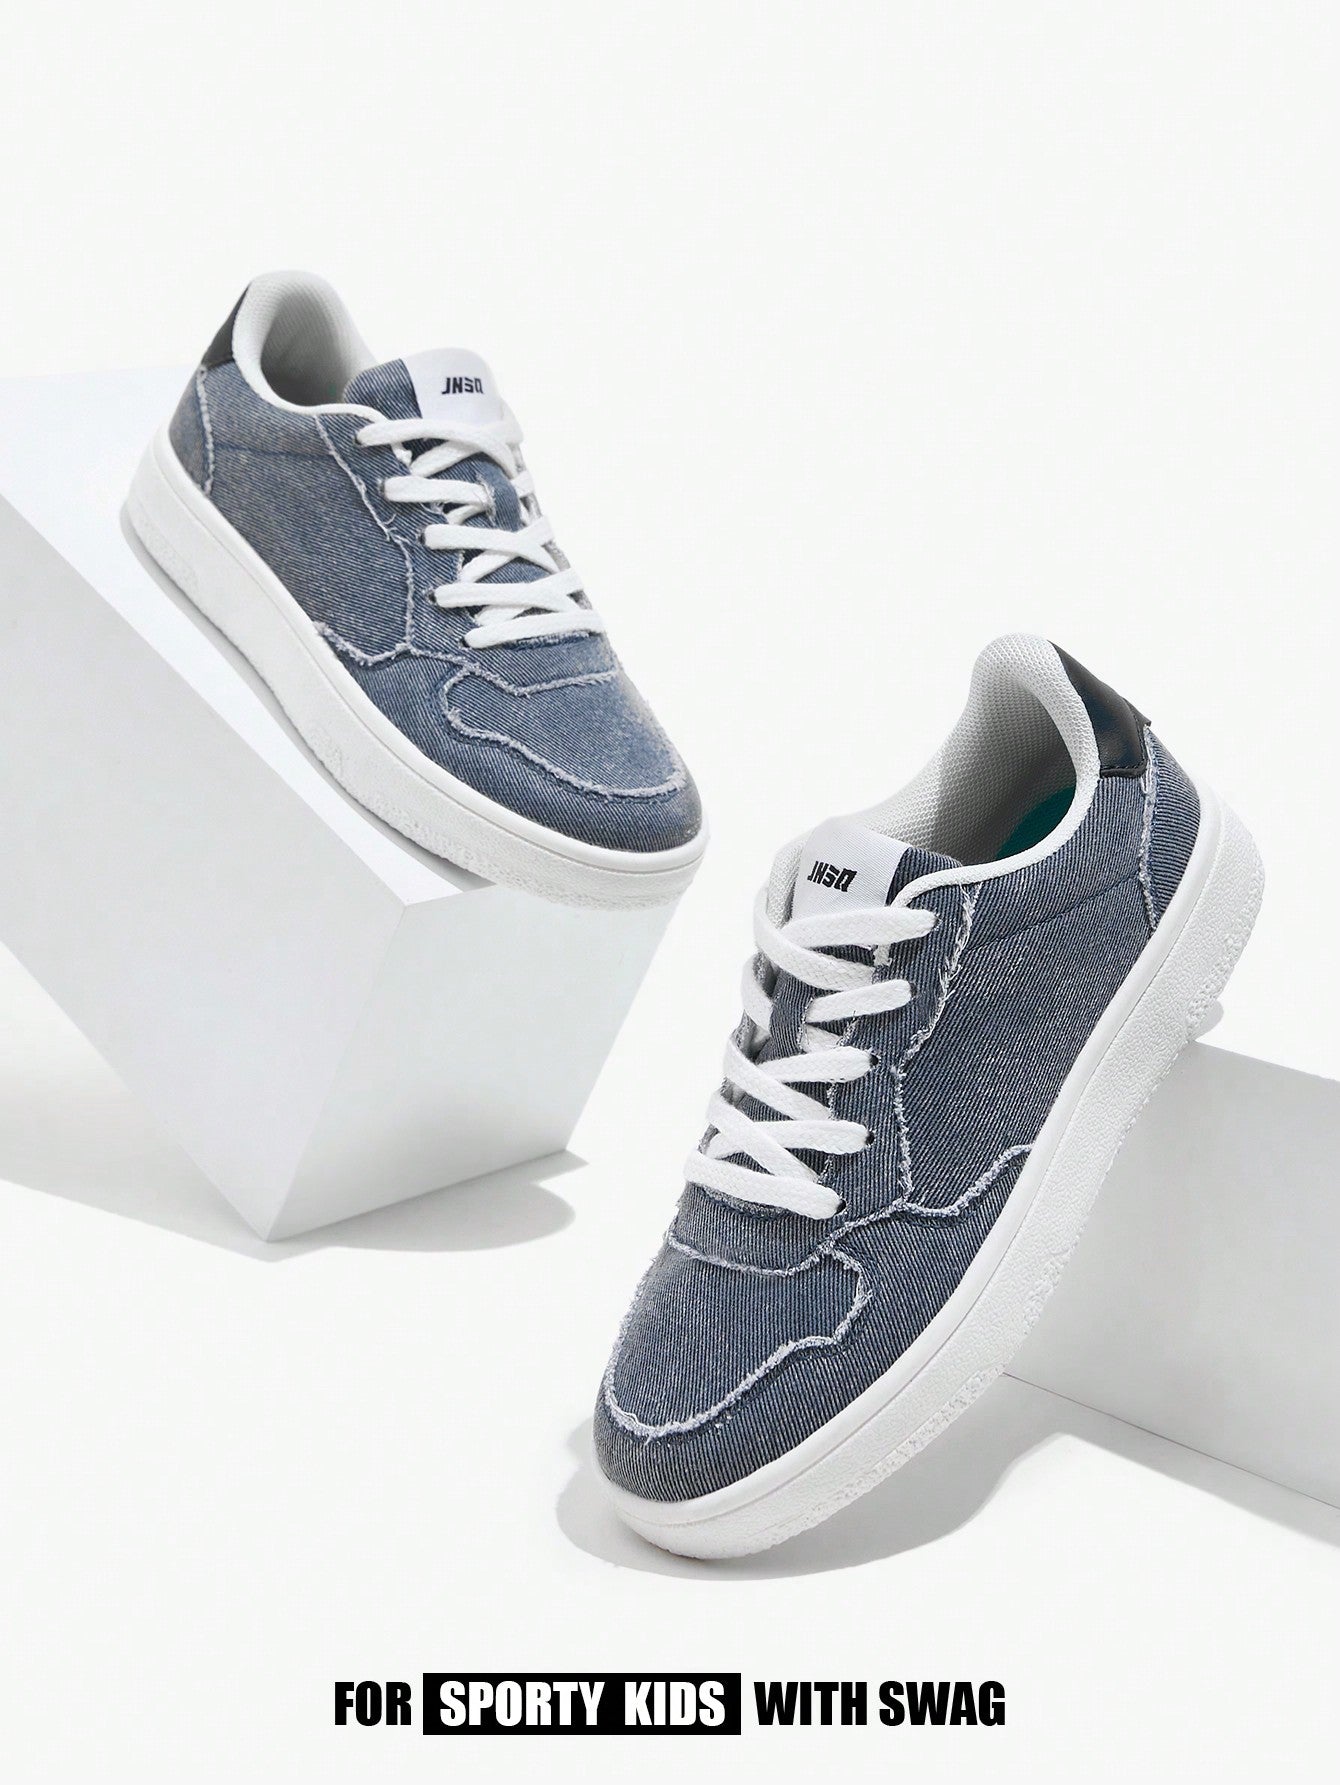 All-Season Fashionable Blue Sneakers For Children, Comfortable And Trendy Flat Sports Shoes